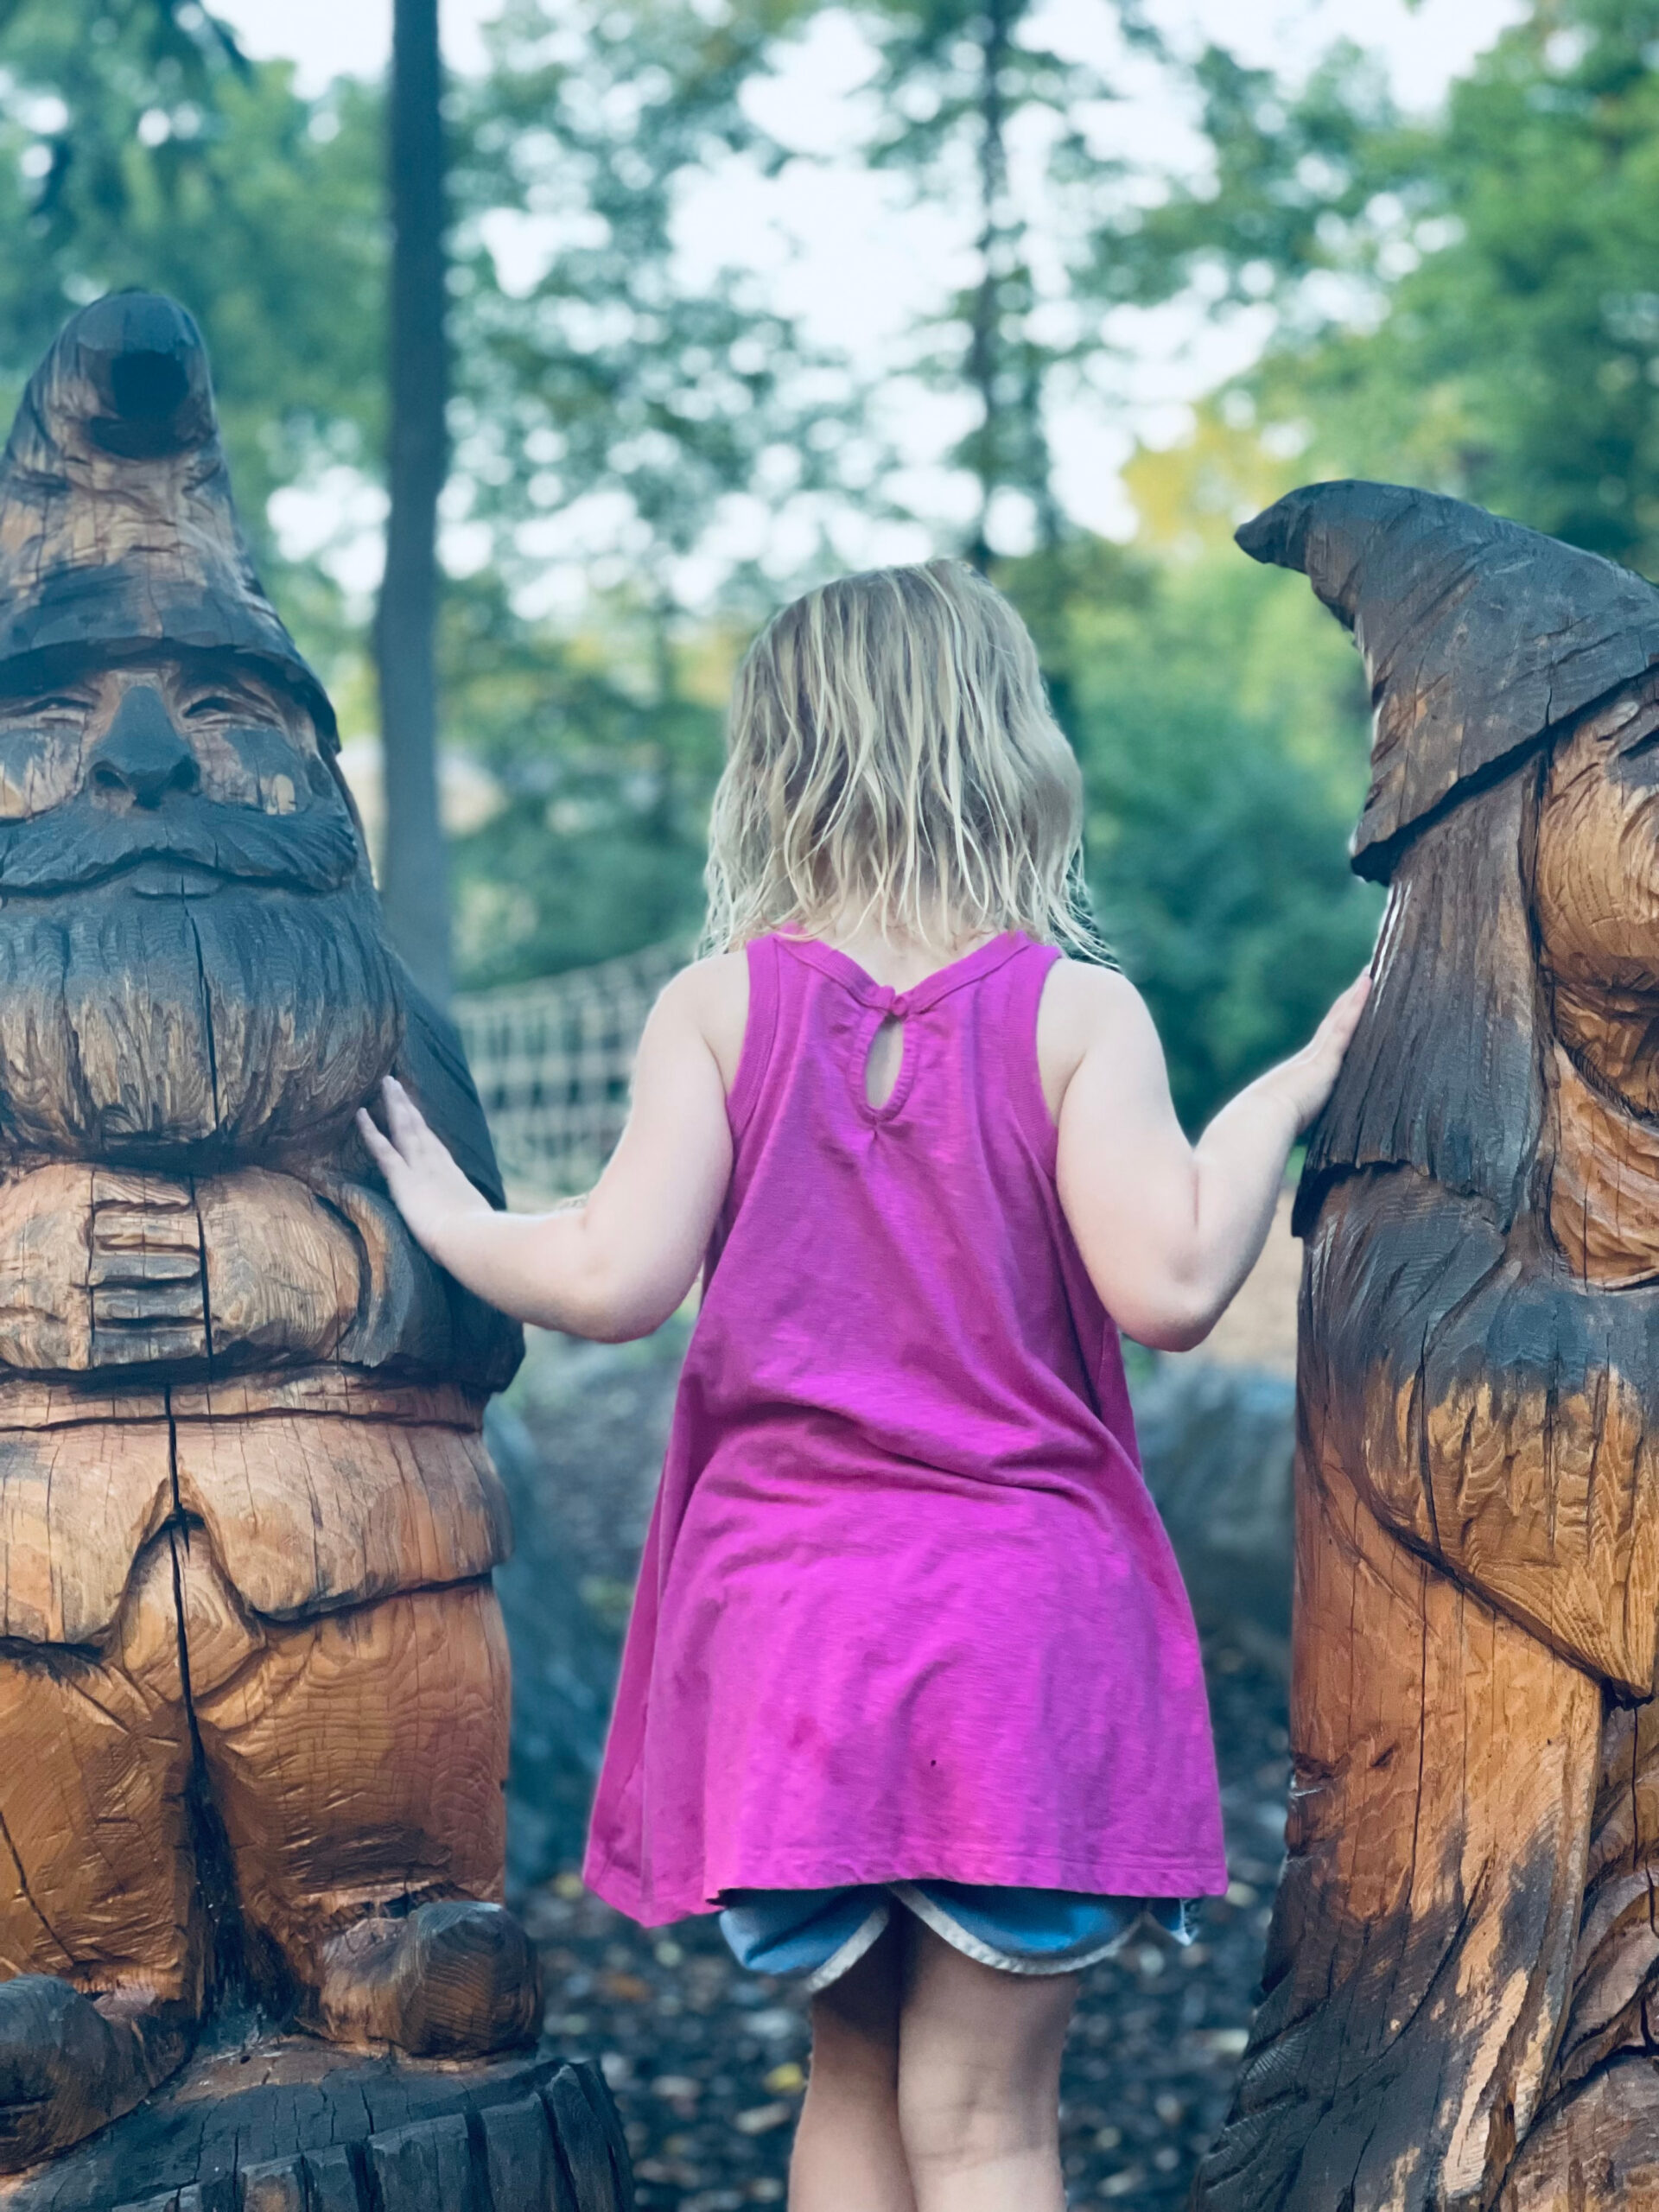 unschooled child standing between two wooden statues at a local park.